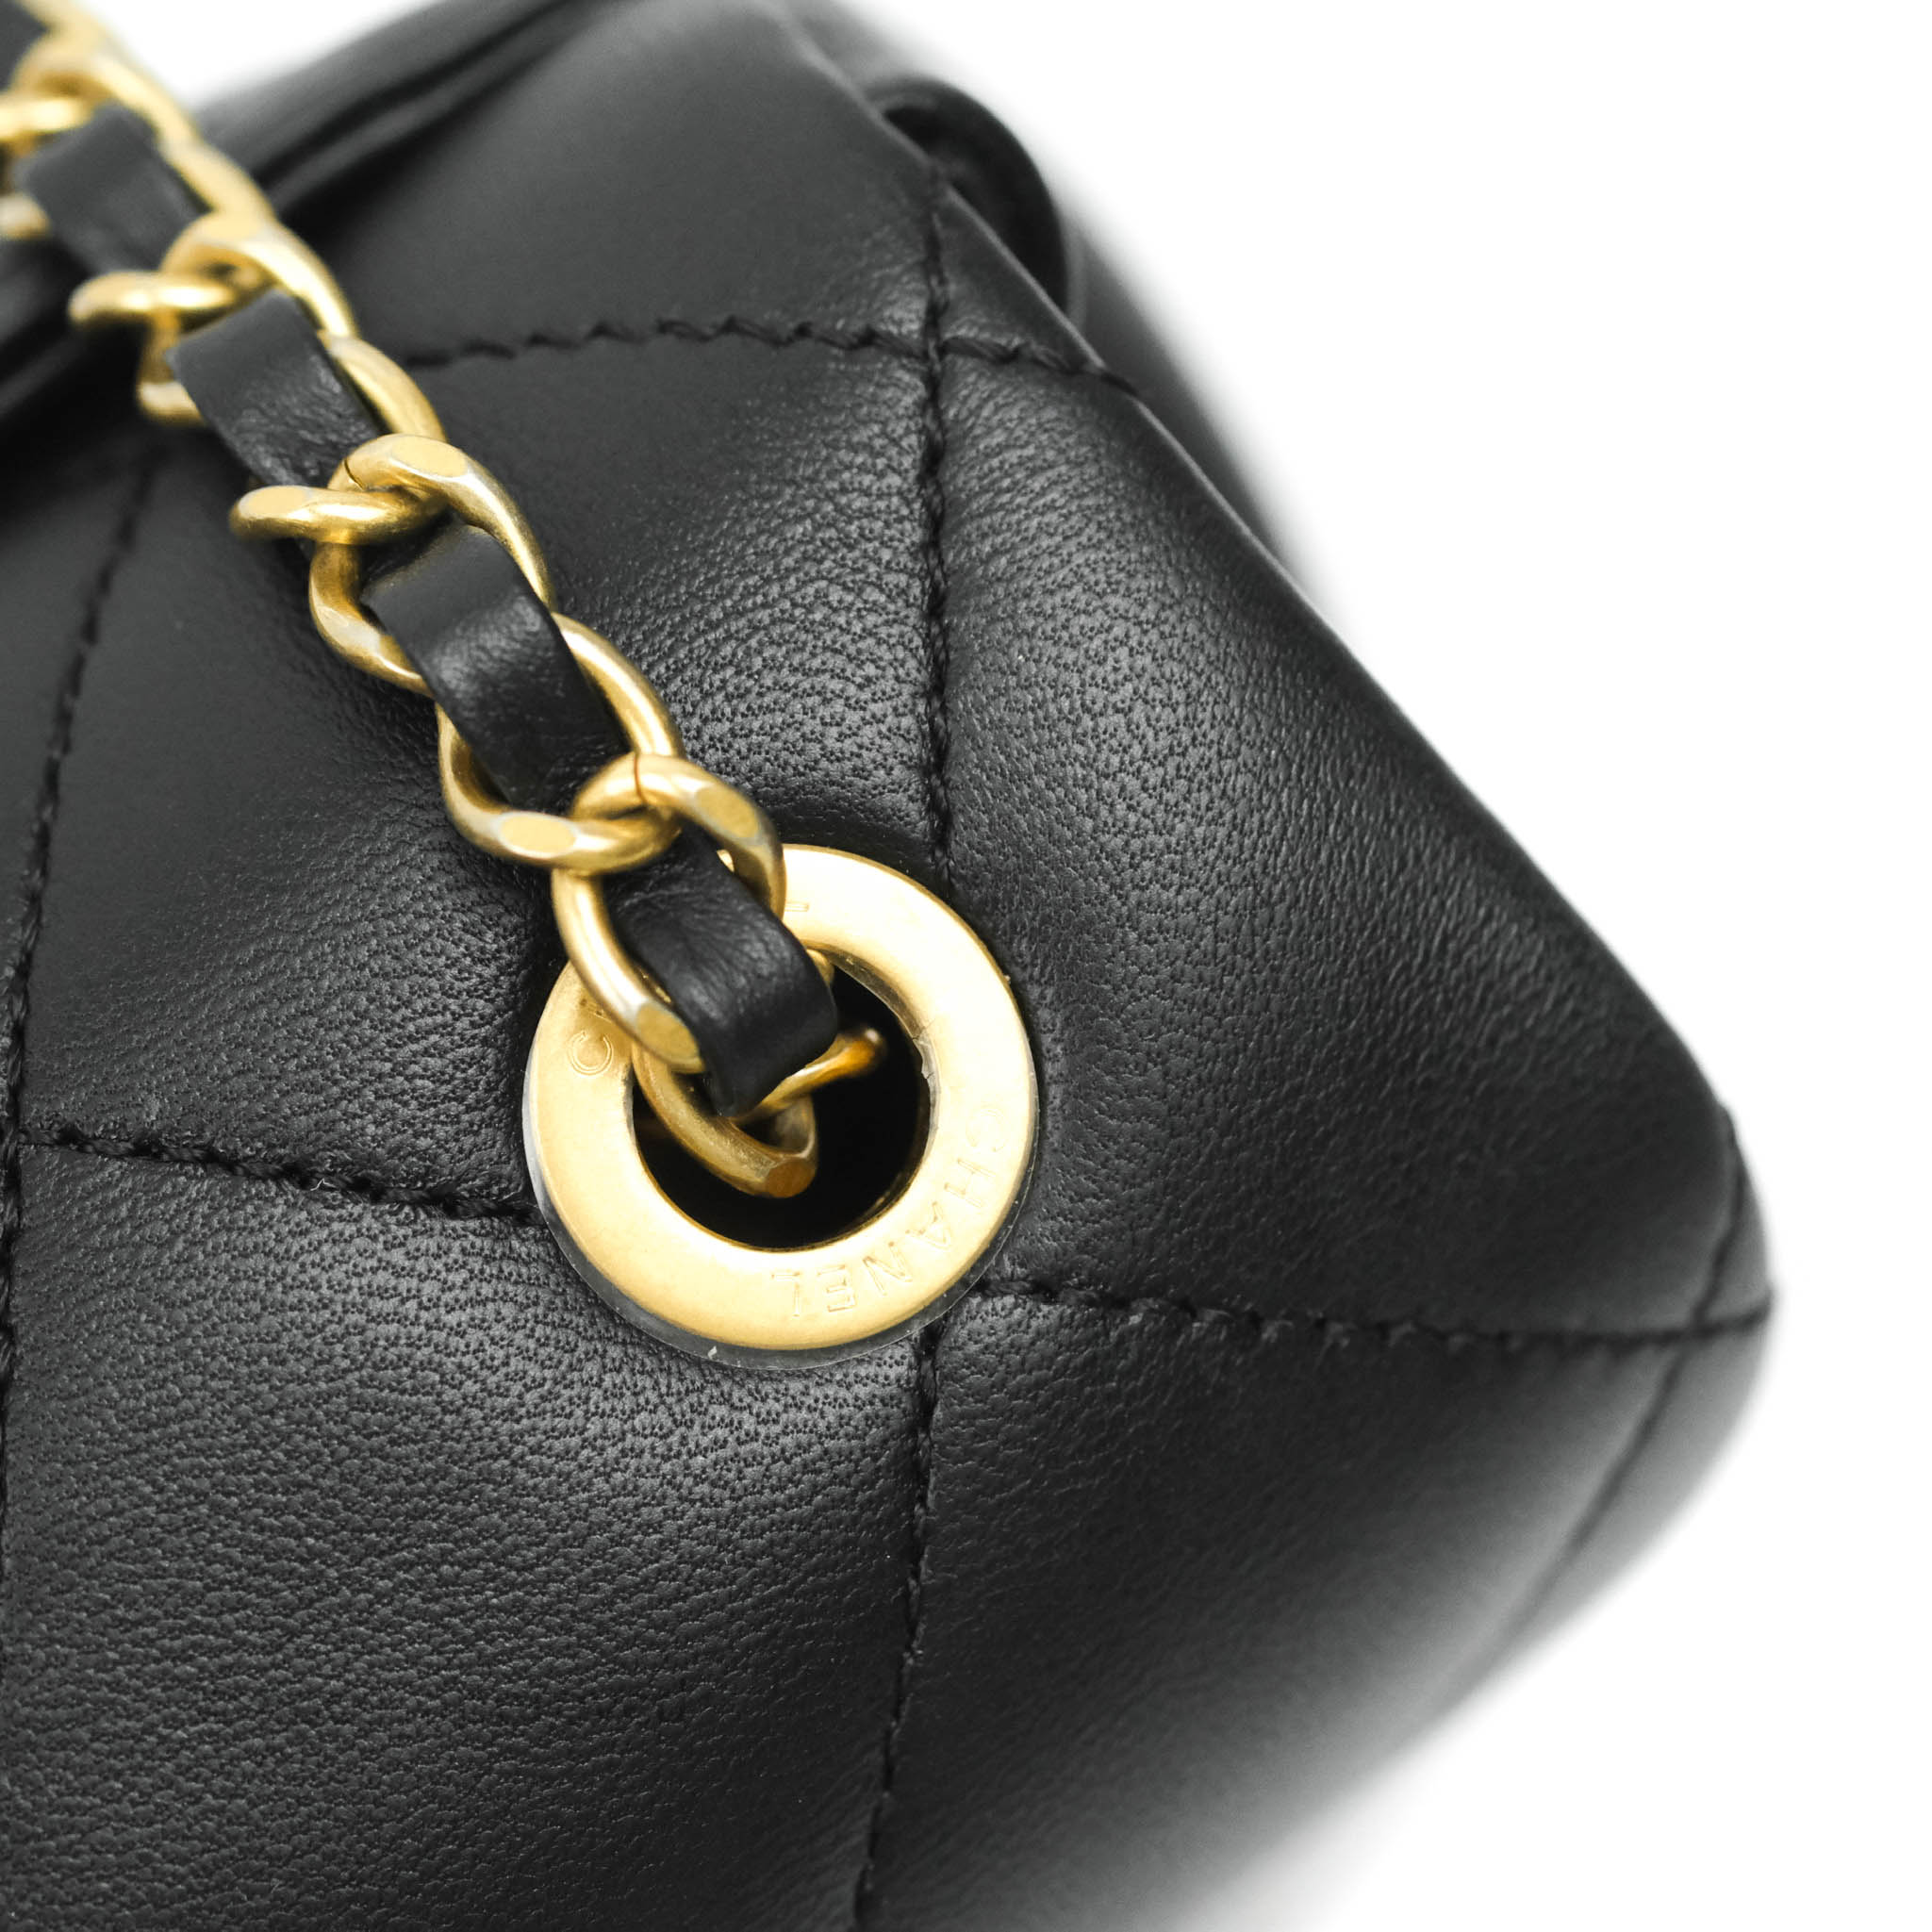 Chanel Black Quilted Lambskin CC Hobo Bag Aged Gold Hardware, 2021 (Like New)